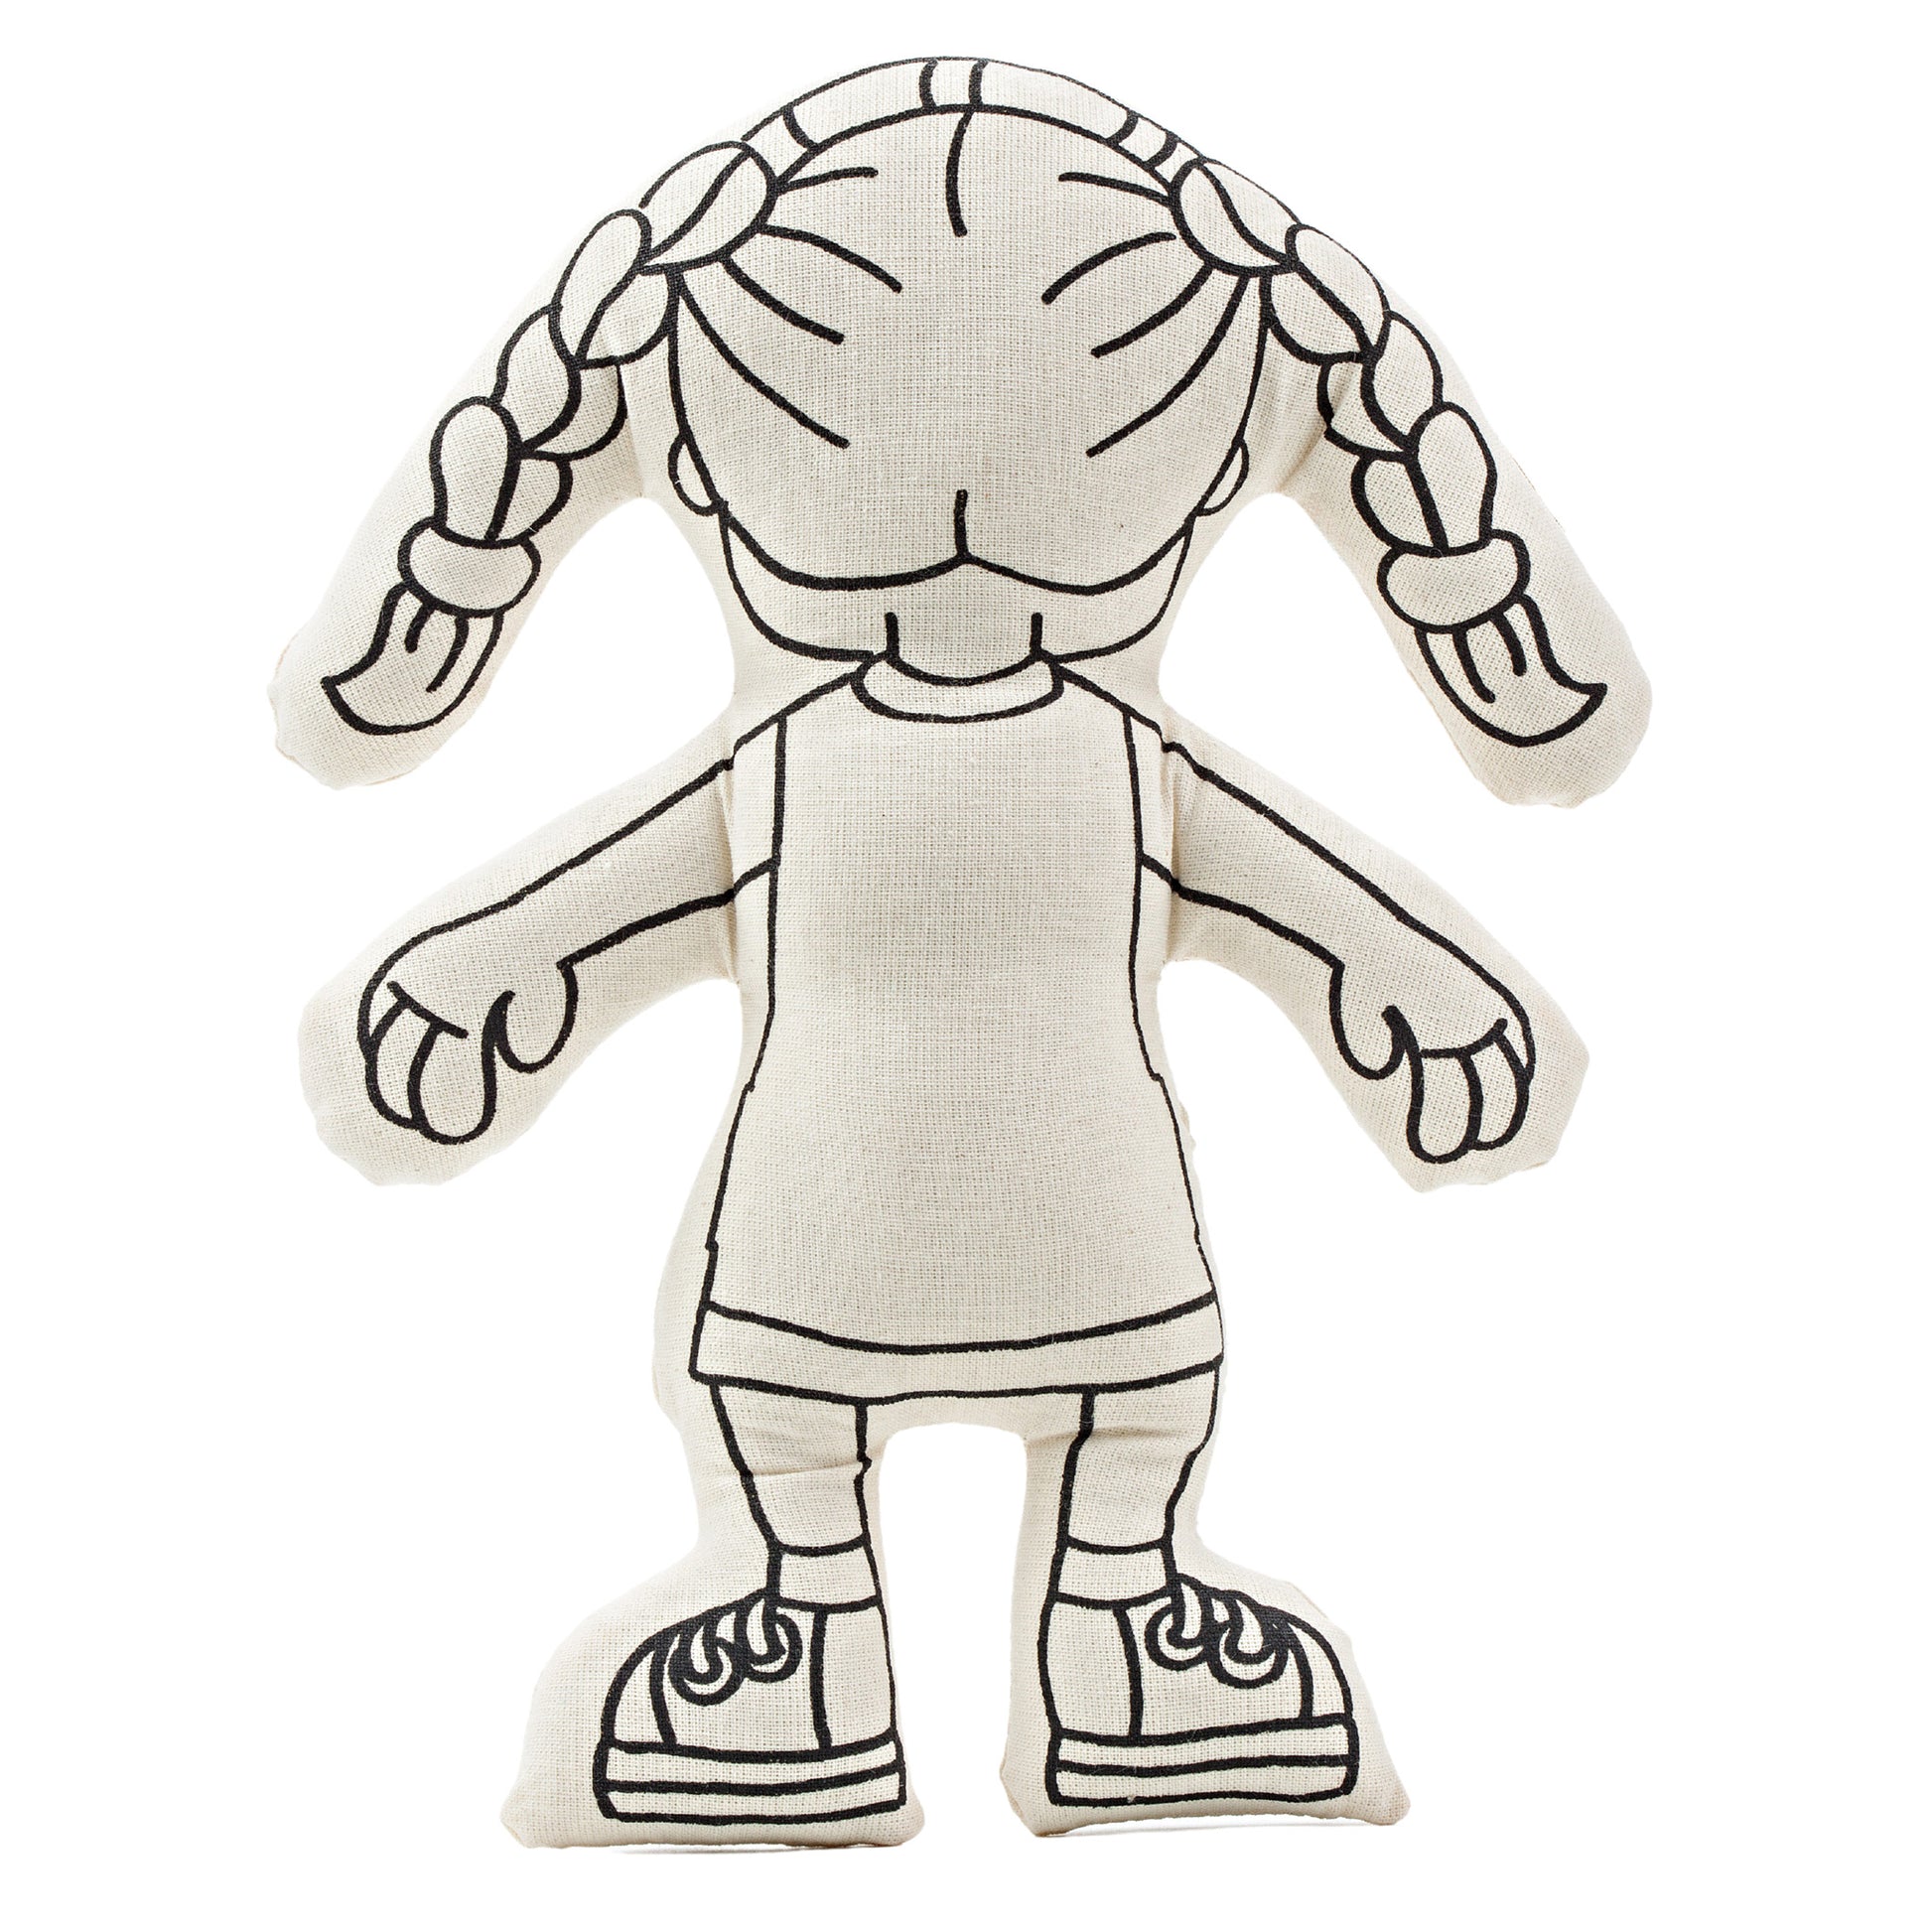 Kiboo Kids - Doll for Coloring - Girl with Braids